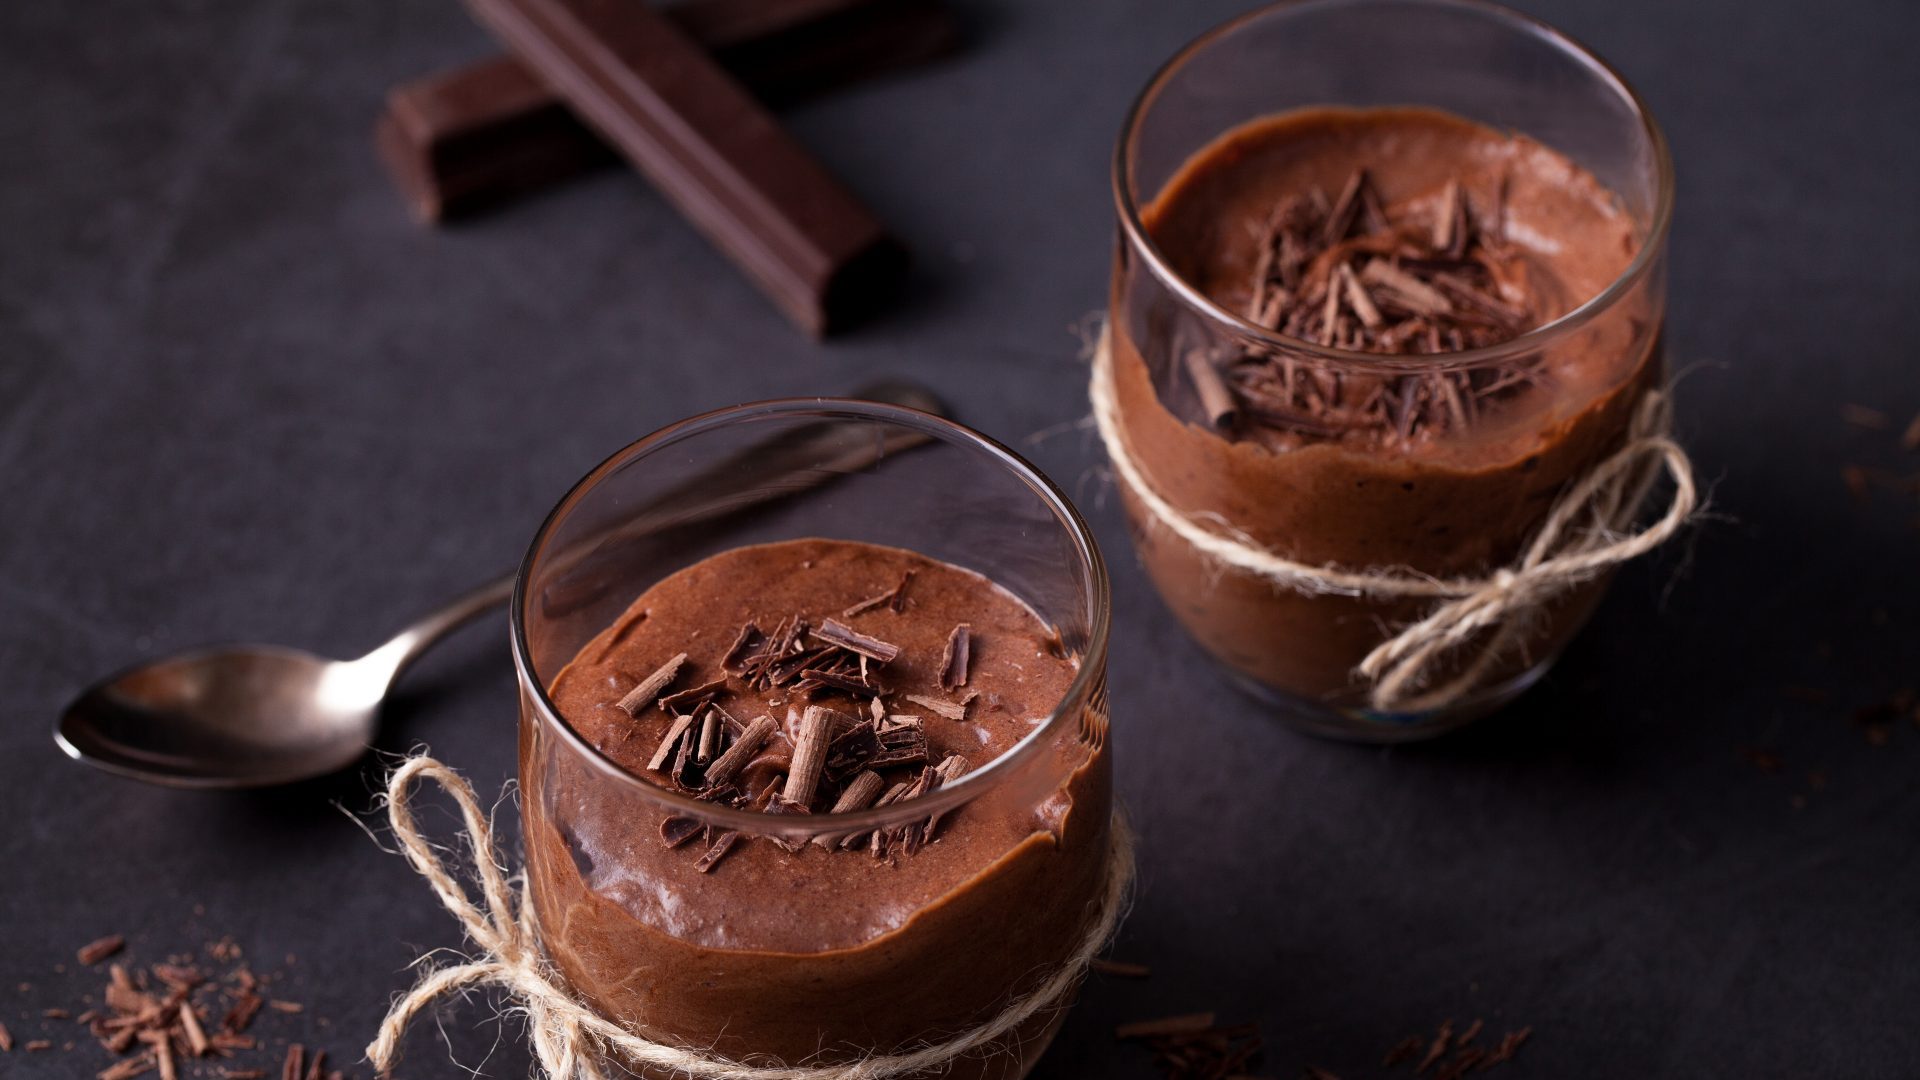 Chocolate mousse provides comfort, familiarity and simple pleasure